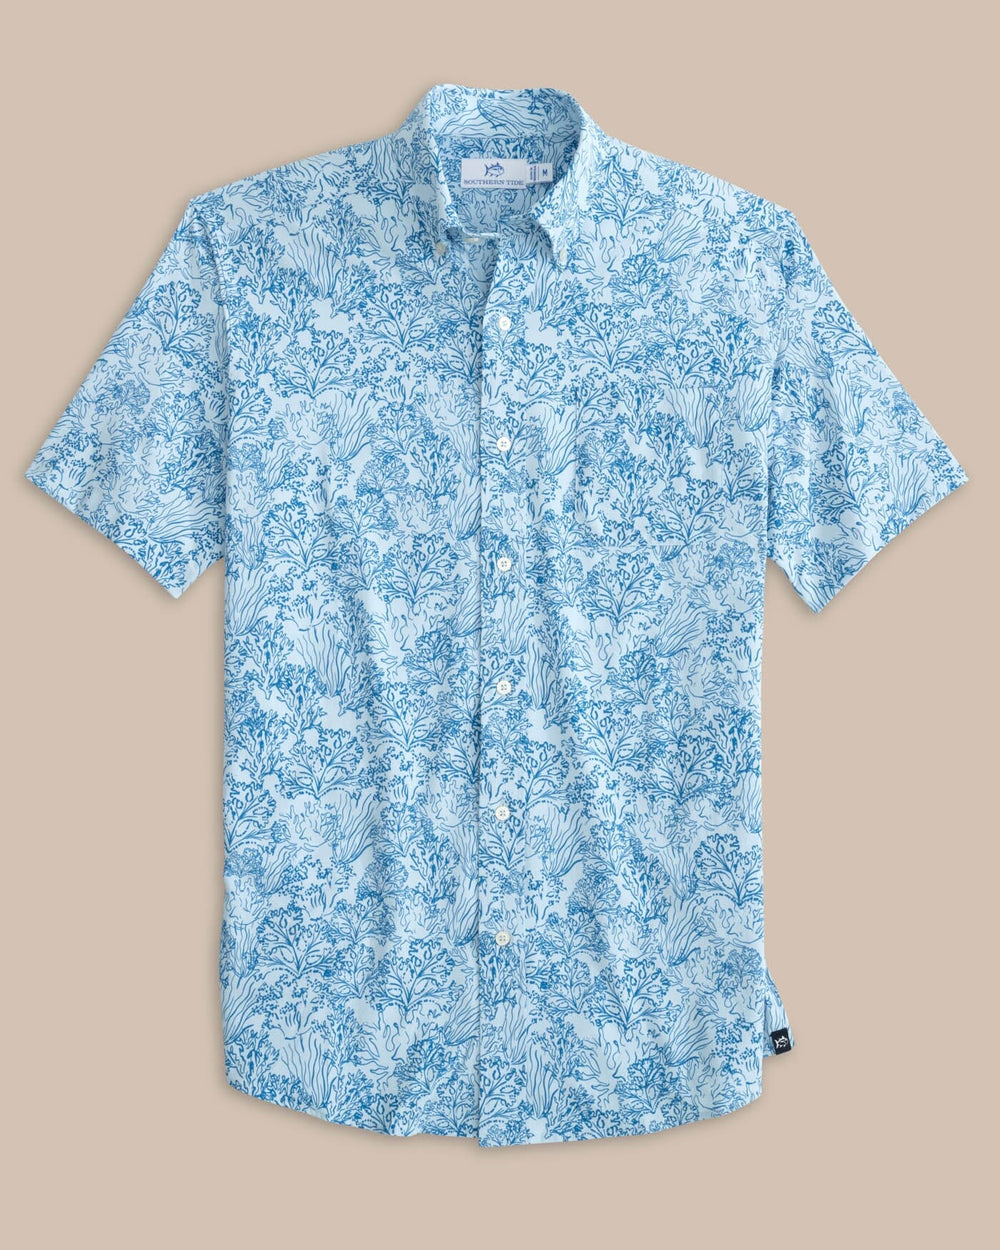 The front view of the Southern Tide Floral Coral Intercoastal Short Sleeve Sport Shirt by Southern Tide - Chilled Blue